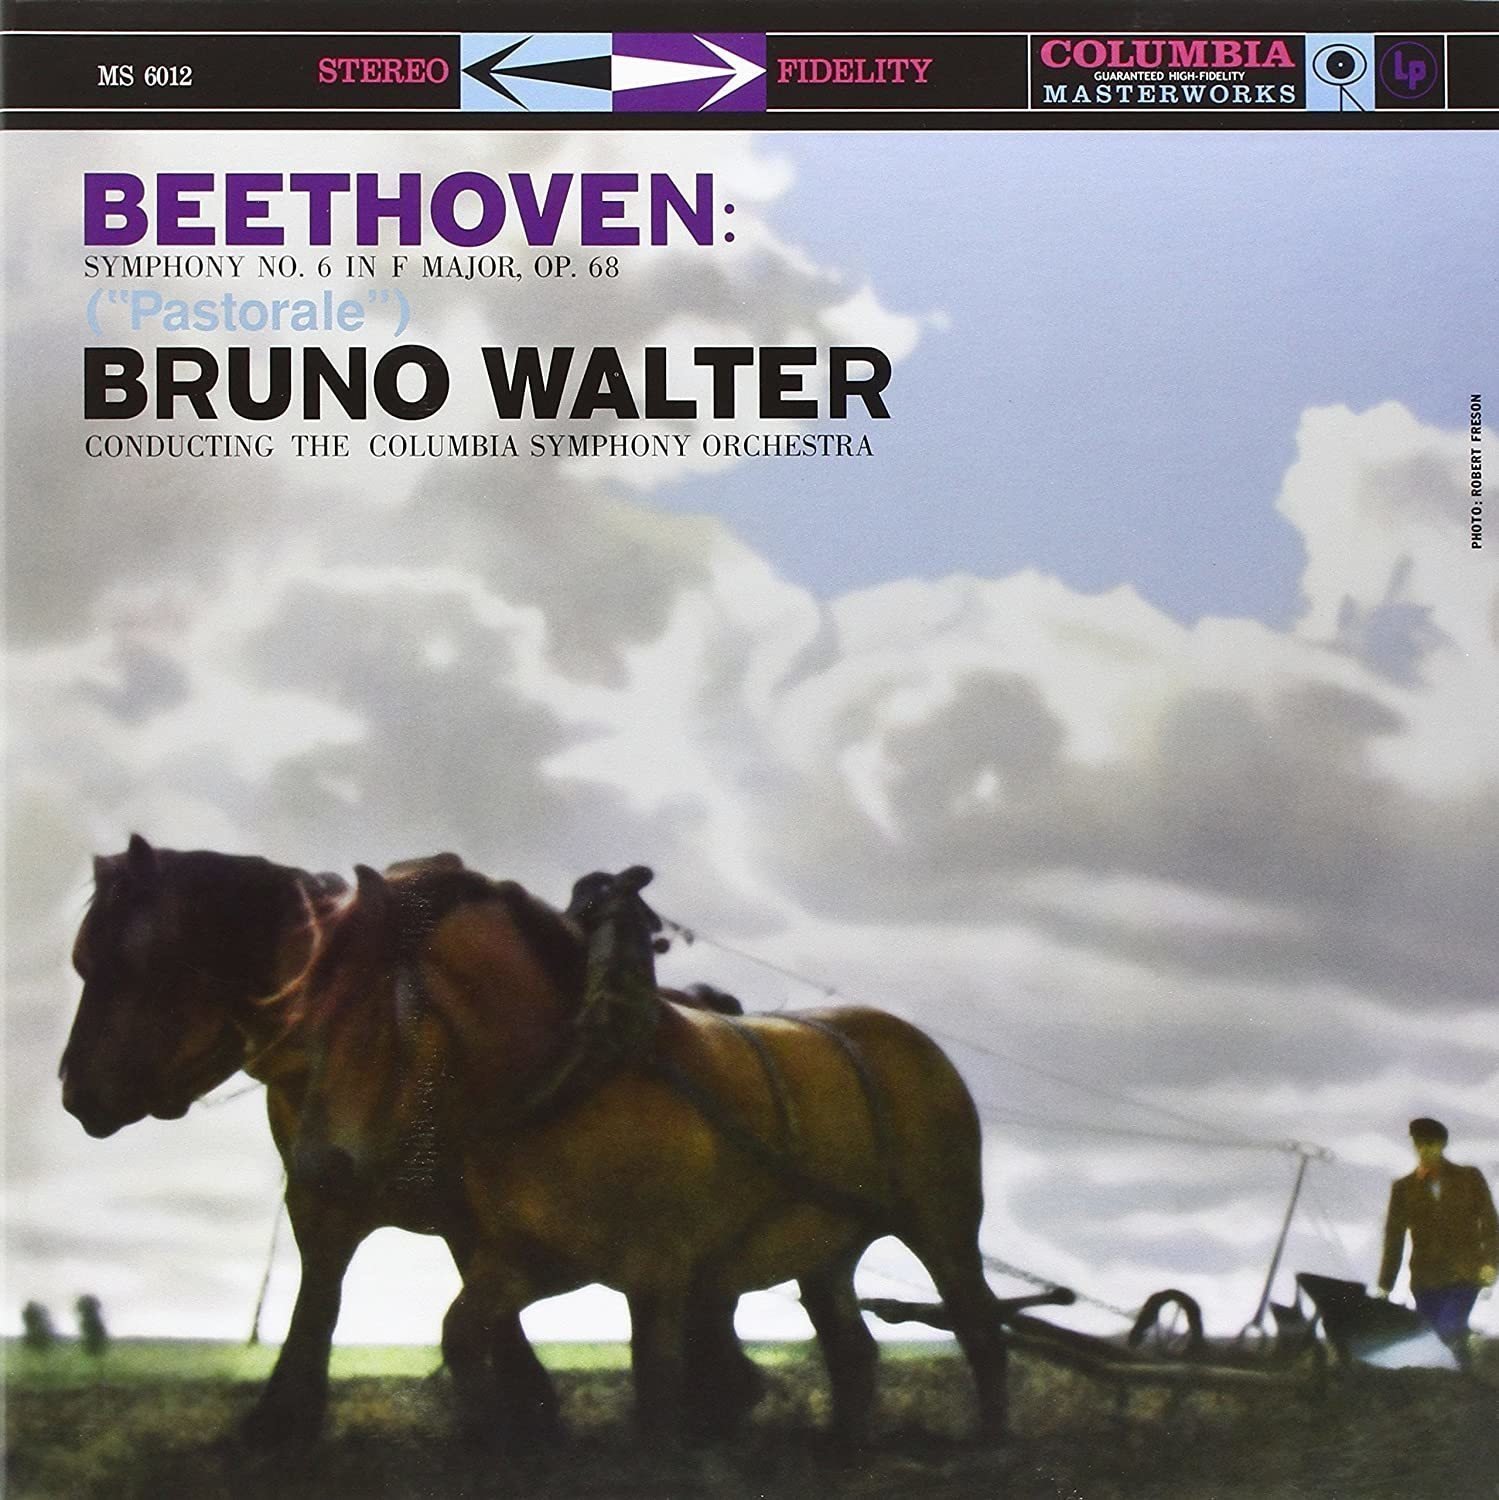 Disque vinyle Bruno Walter - Columbia Symphony Orchestra - Beethoven's Symphony No. 6 In F Major, Op. 68 (Pastorale) (LP)